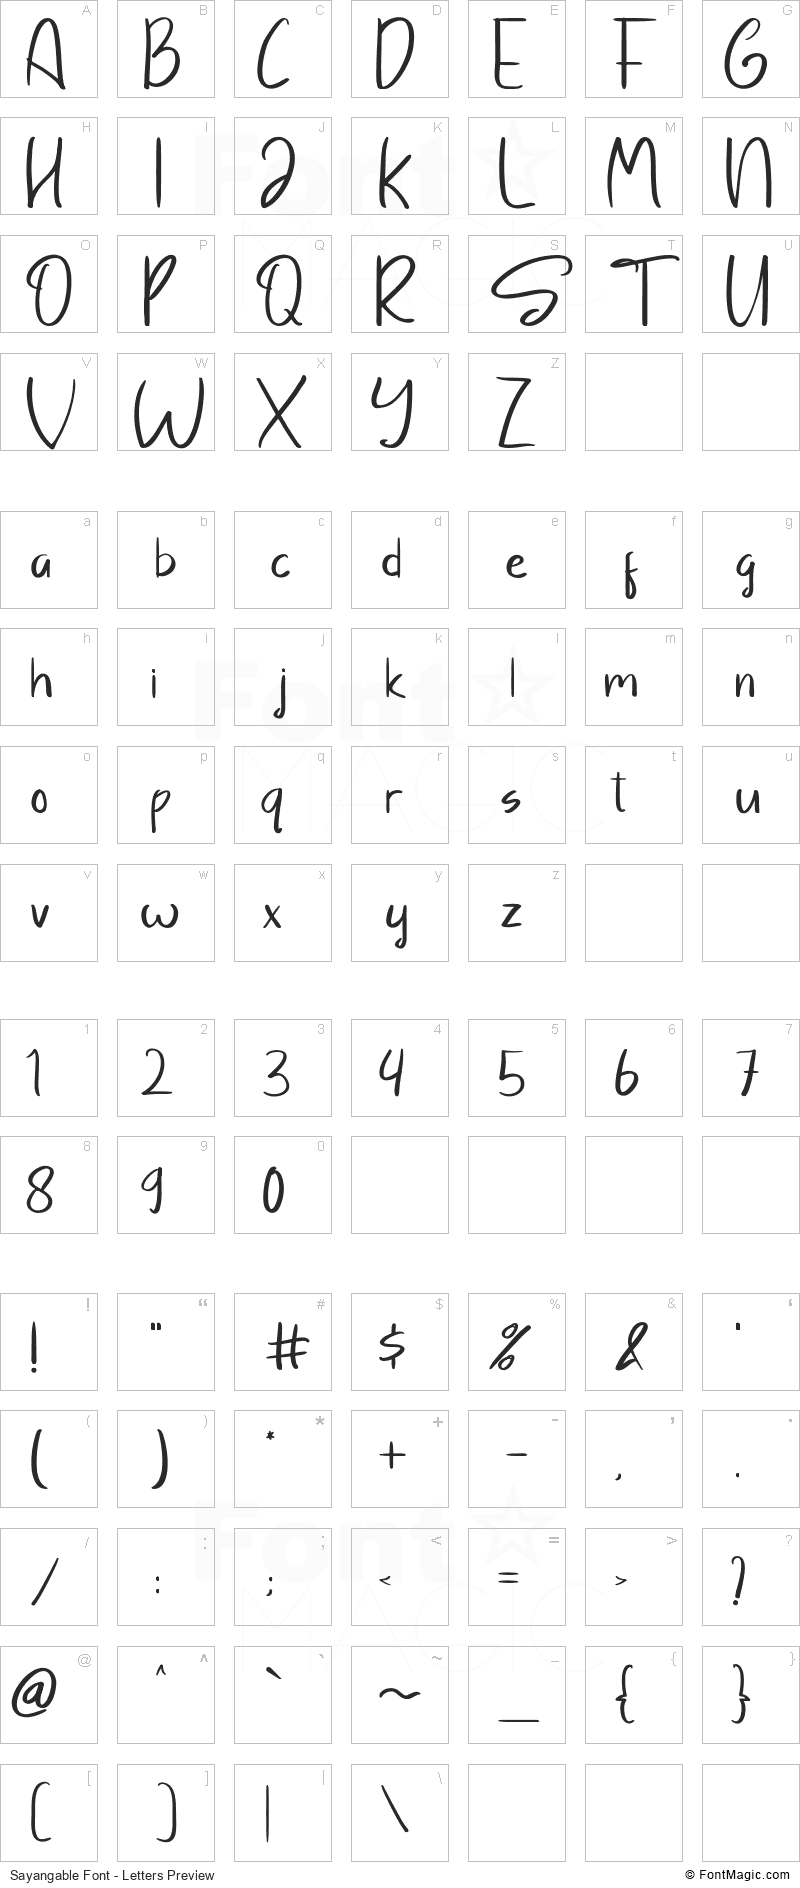 Sayangable Font - All Latters Preview Chart